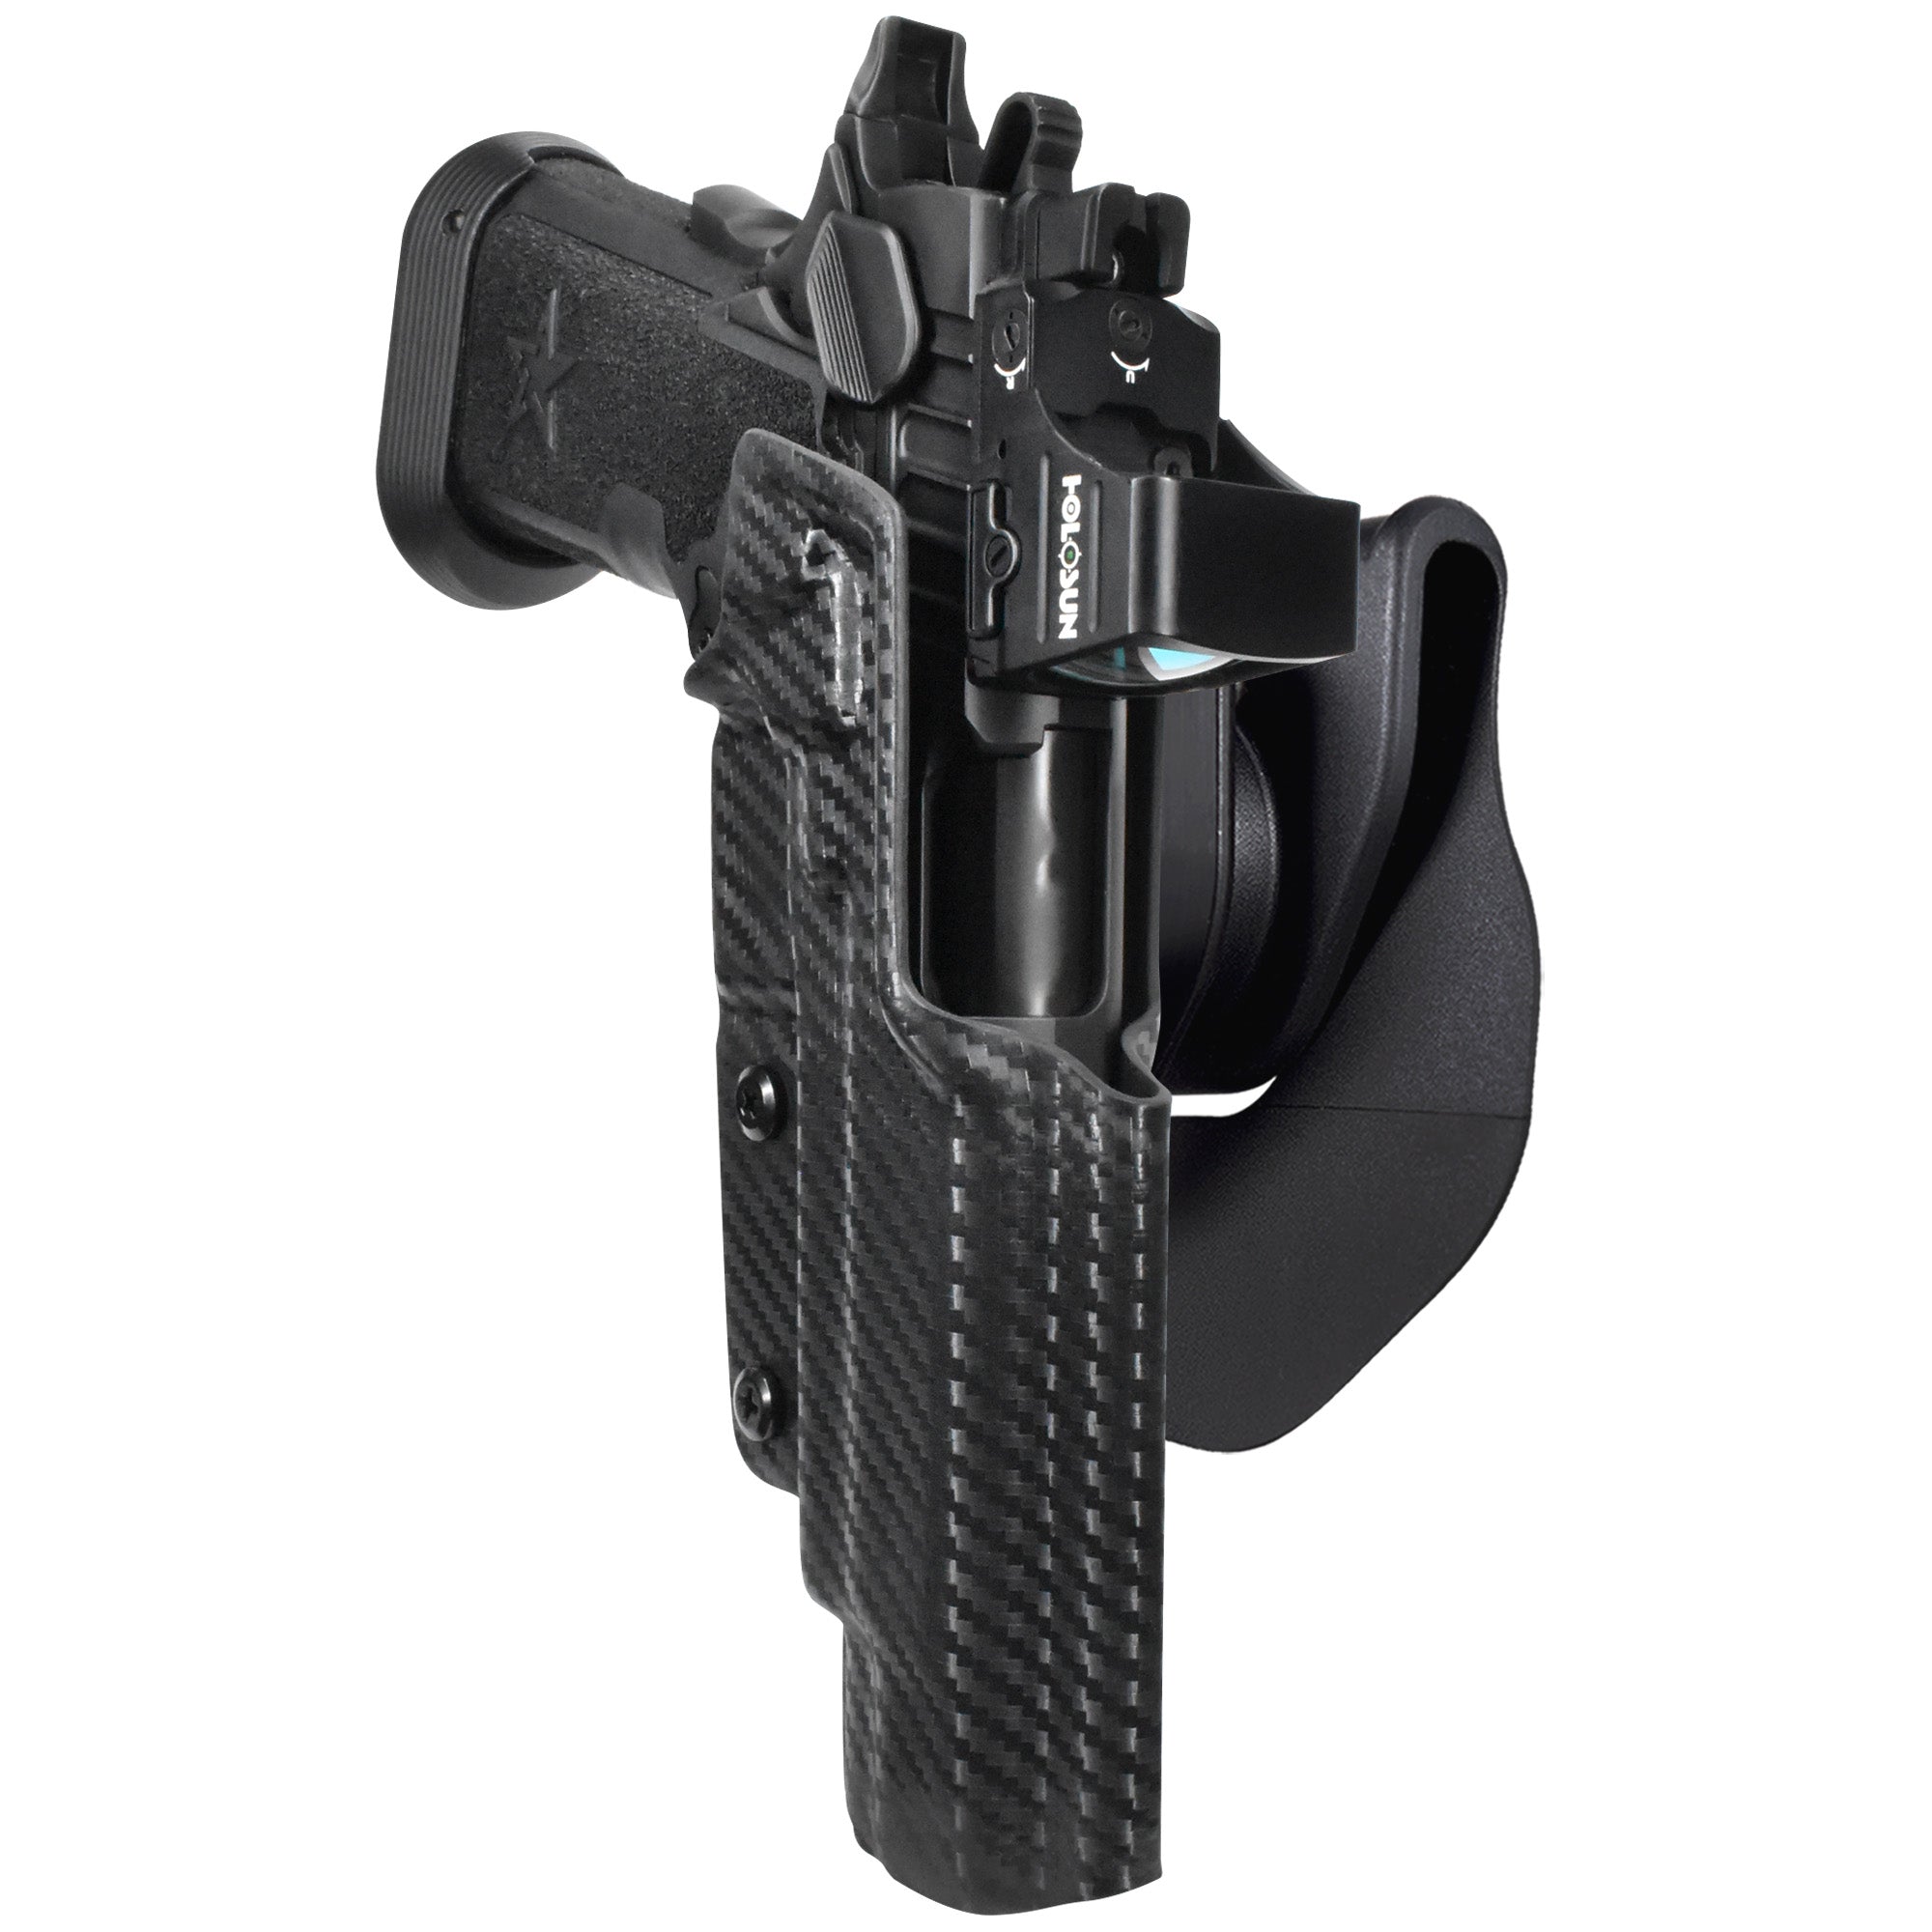 Staccato XL OWB Quick Release Paddle Holster in Carbon Fiber